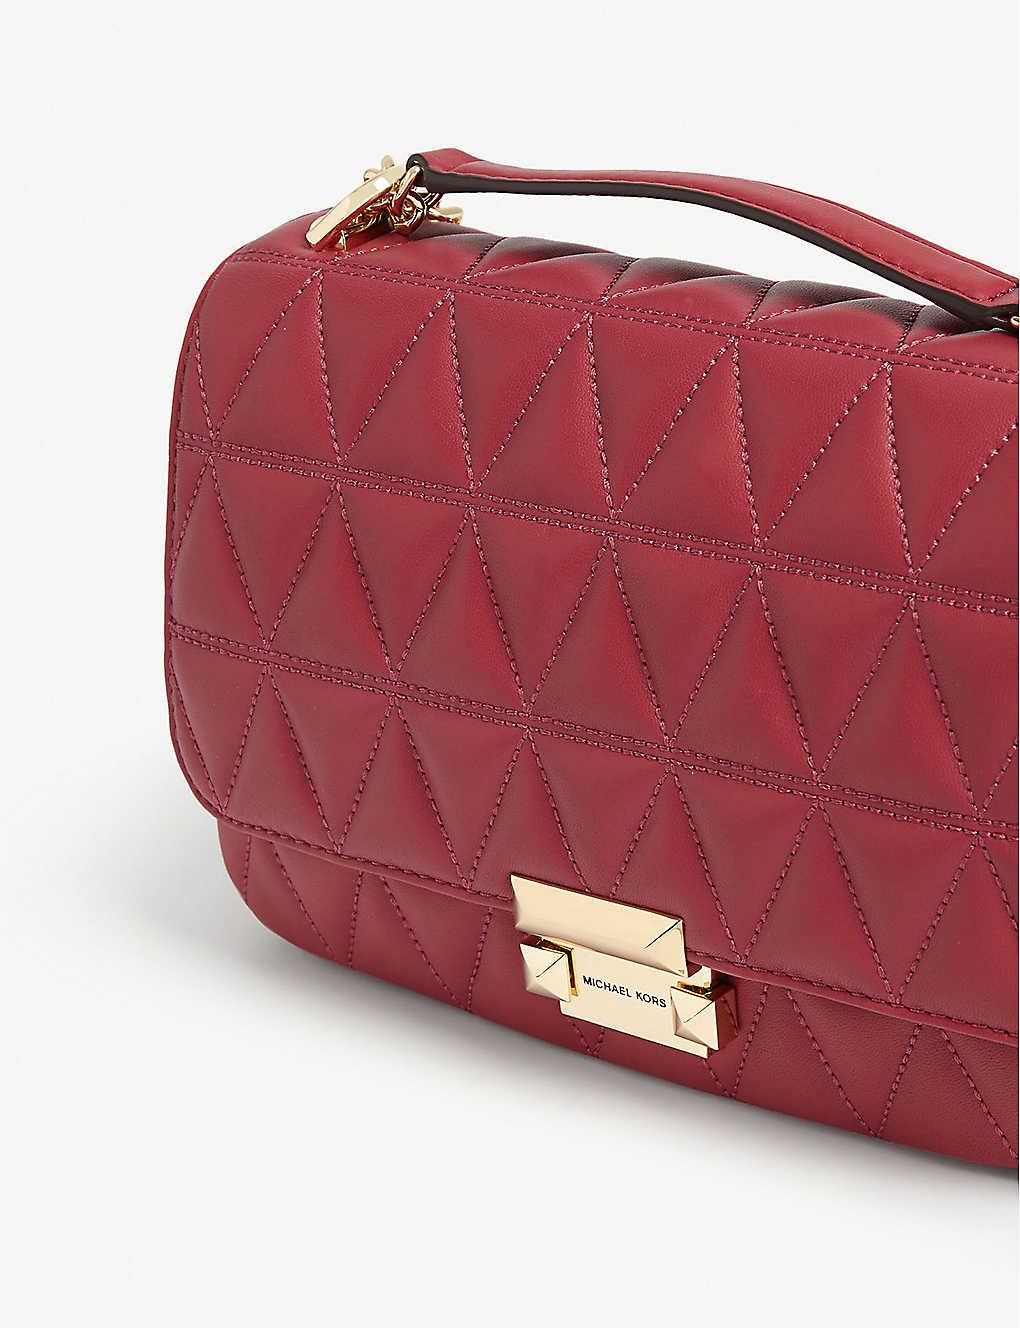 MICHAEL Michael Kors Sloan Large Quilted Leather Shoulder Bag in Red | Lyst